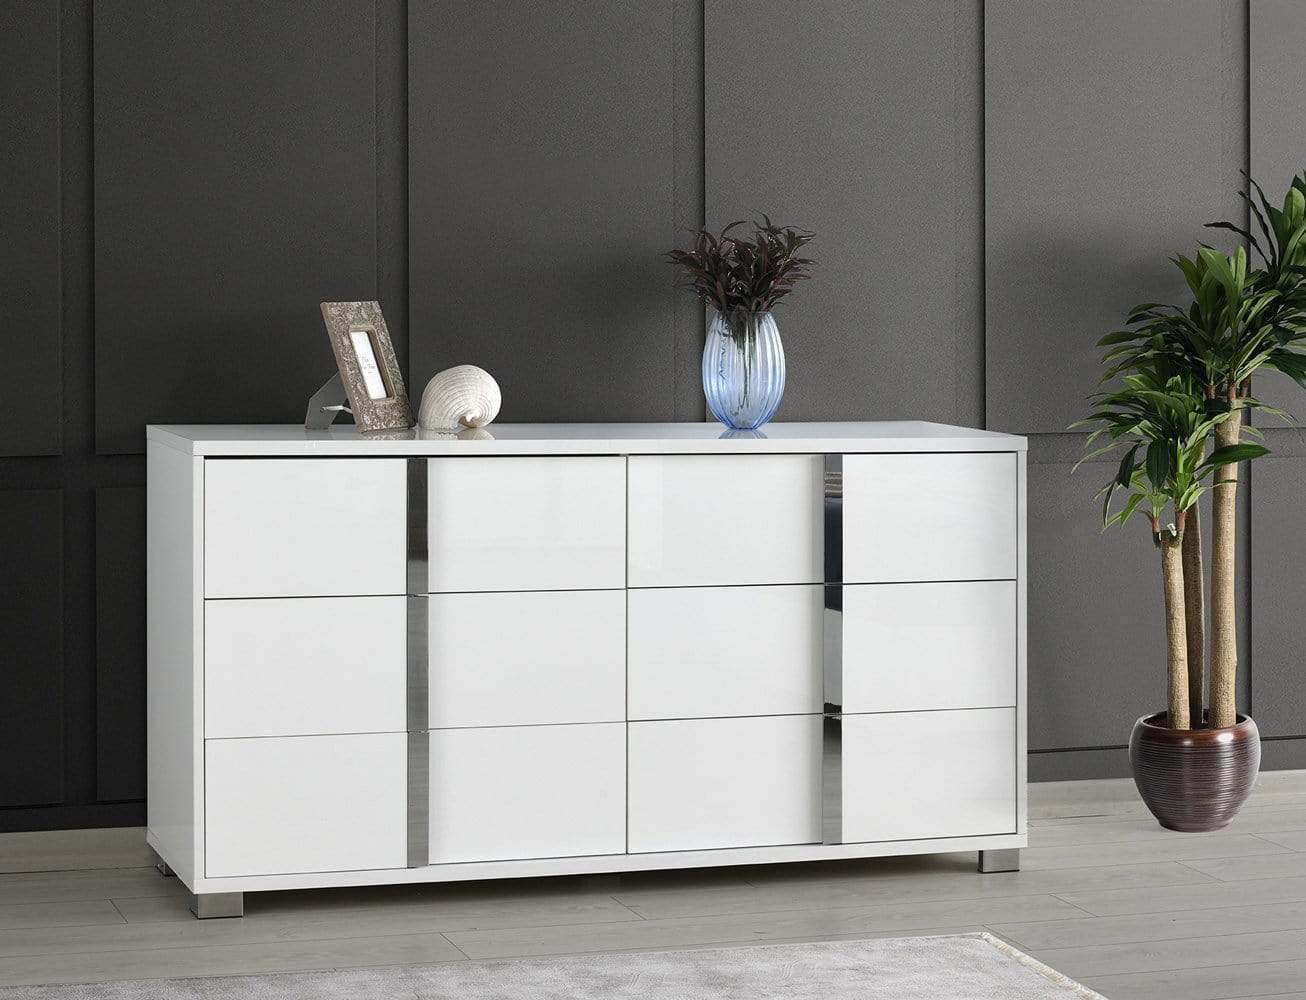 J and M Furniture Bedroom Furniture Sets Giulia Bedroom Collection in Gloss White | J&M Furniture